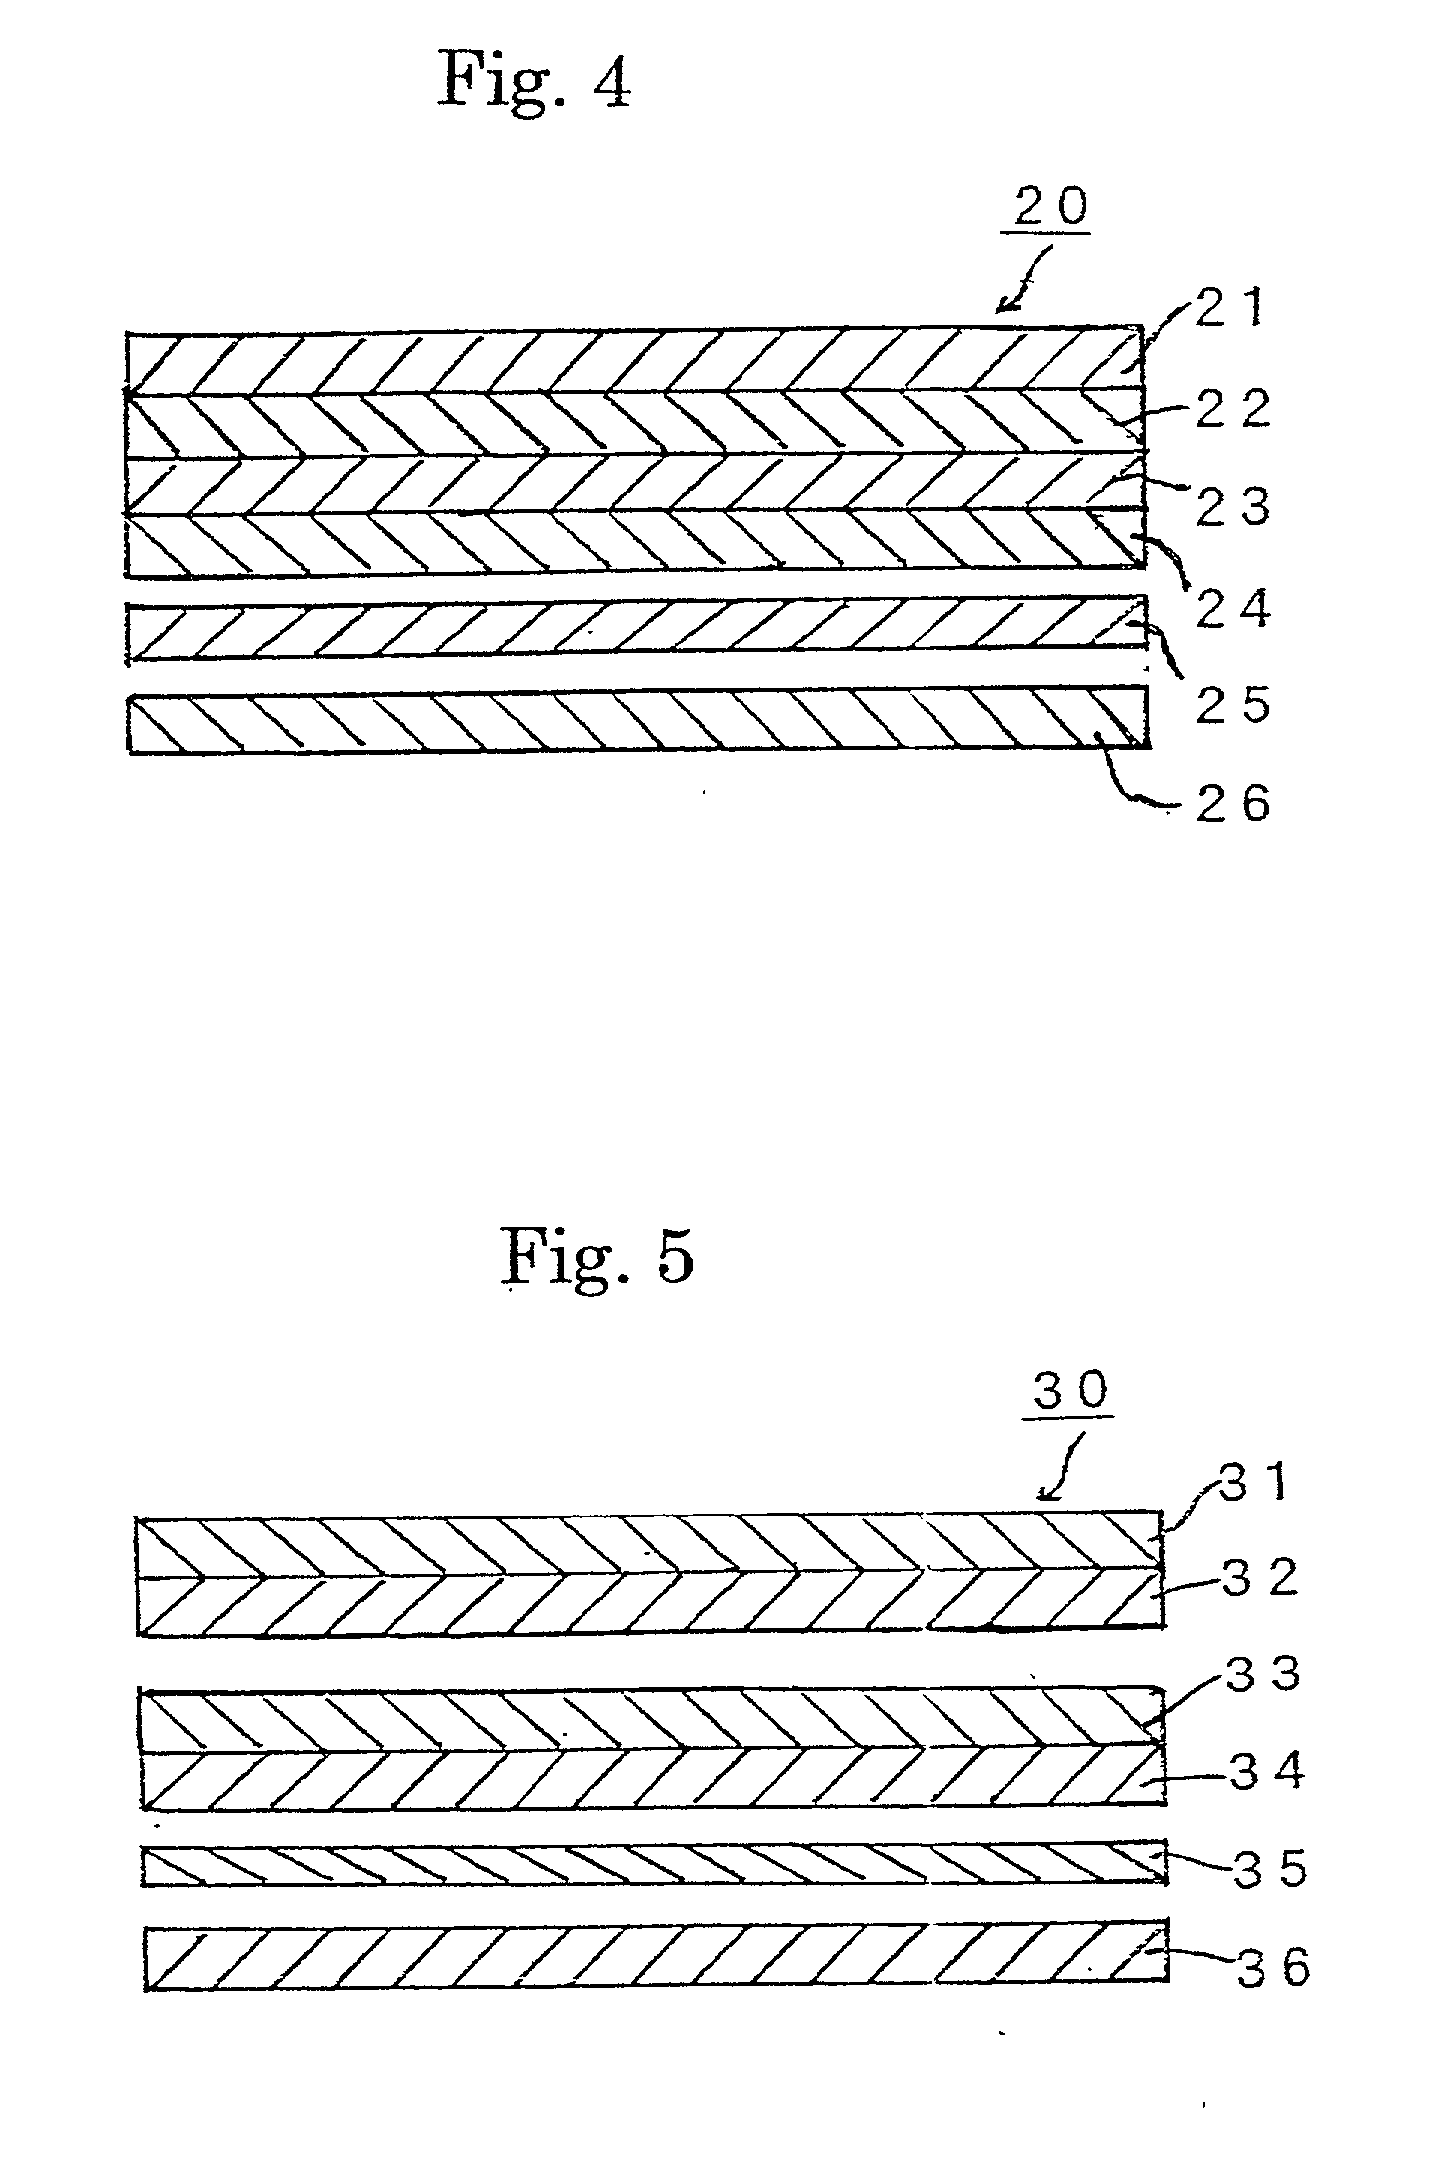 Backside covering material for a solar cell module and its use